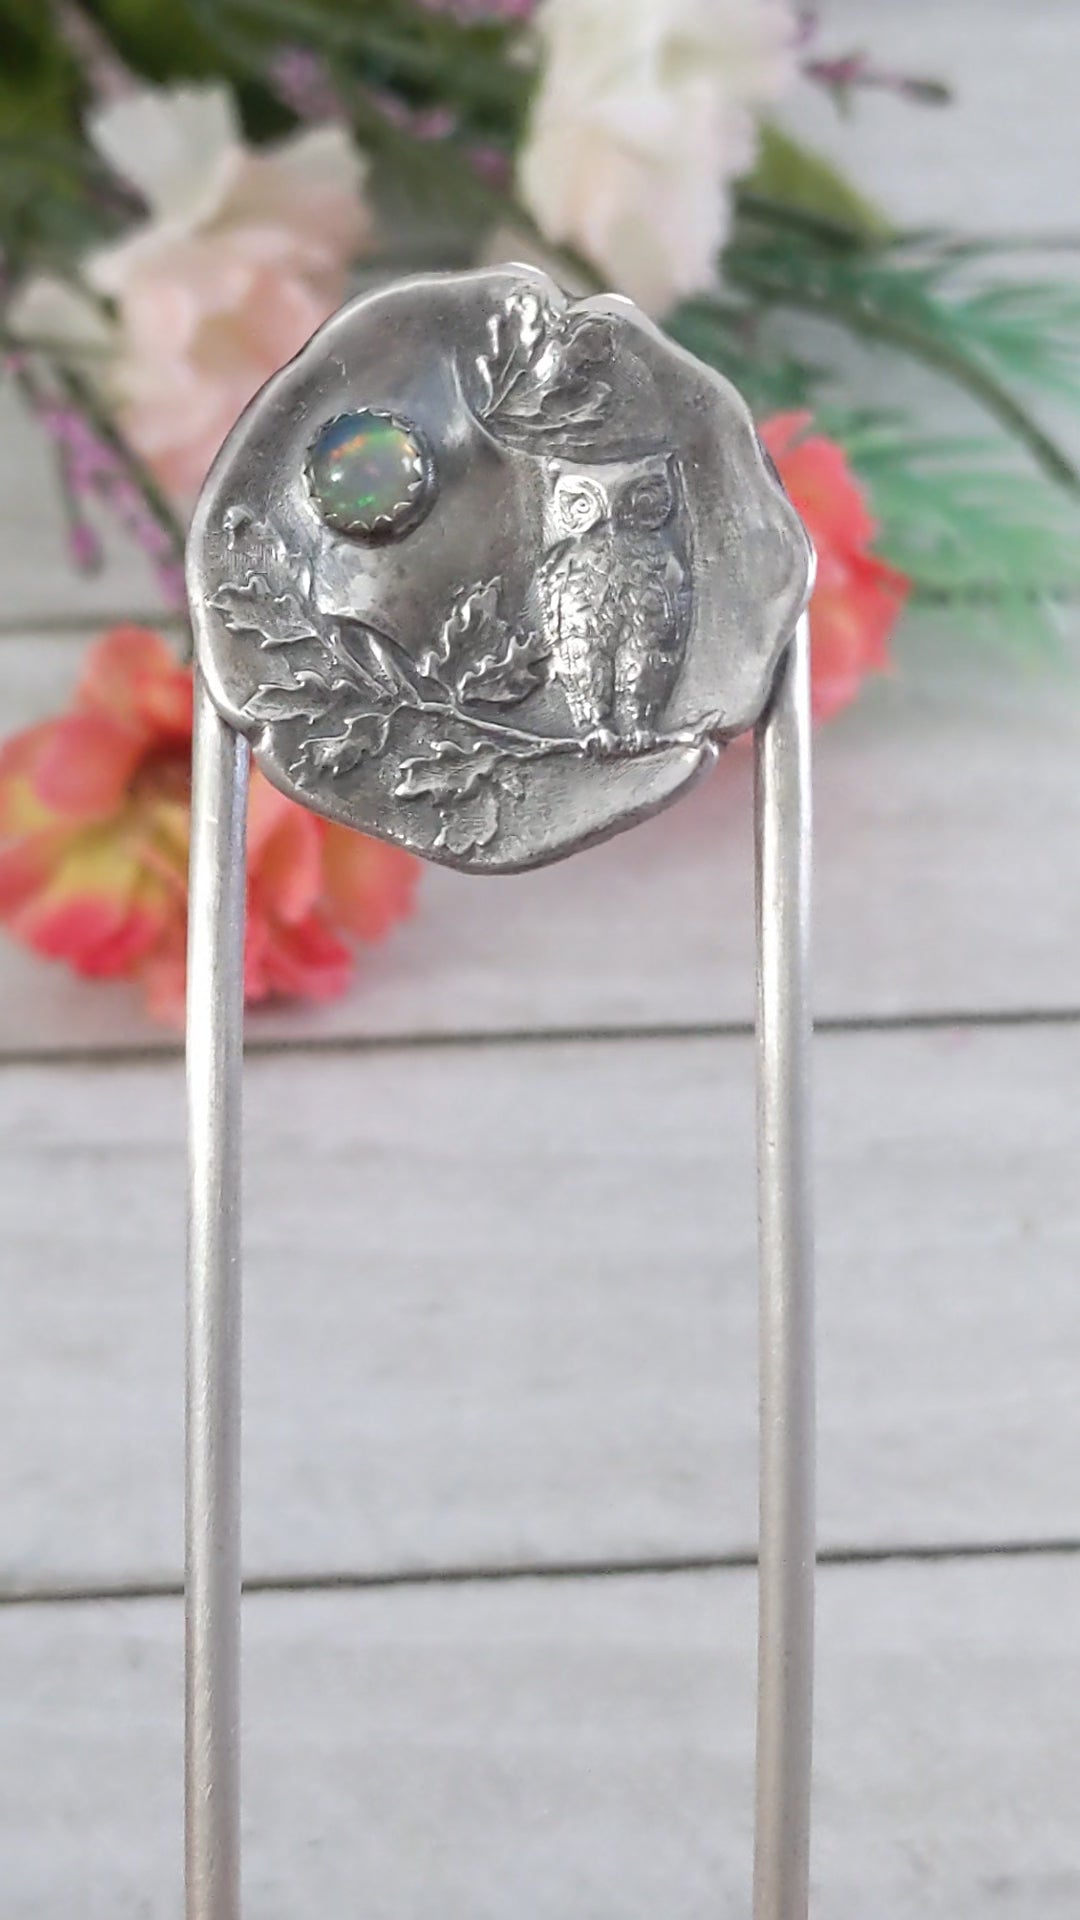 Video of Sterling silver hair fork. The design at the top of the hair fork is a round sterling silver piece with a 3 dimensional design of an owl sitting on a tree branch. The branch has leaves, oak perhaps. Above the leaves there is a white opal gemstone to represent the moon. 